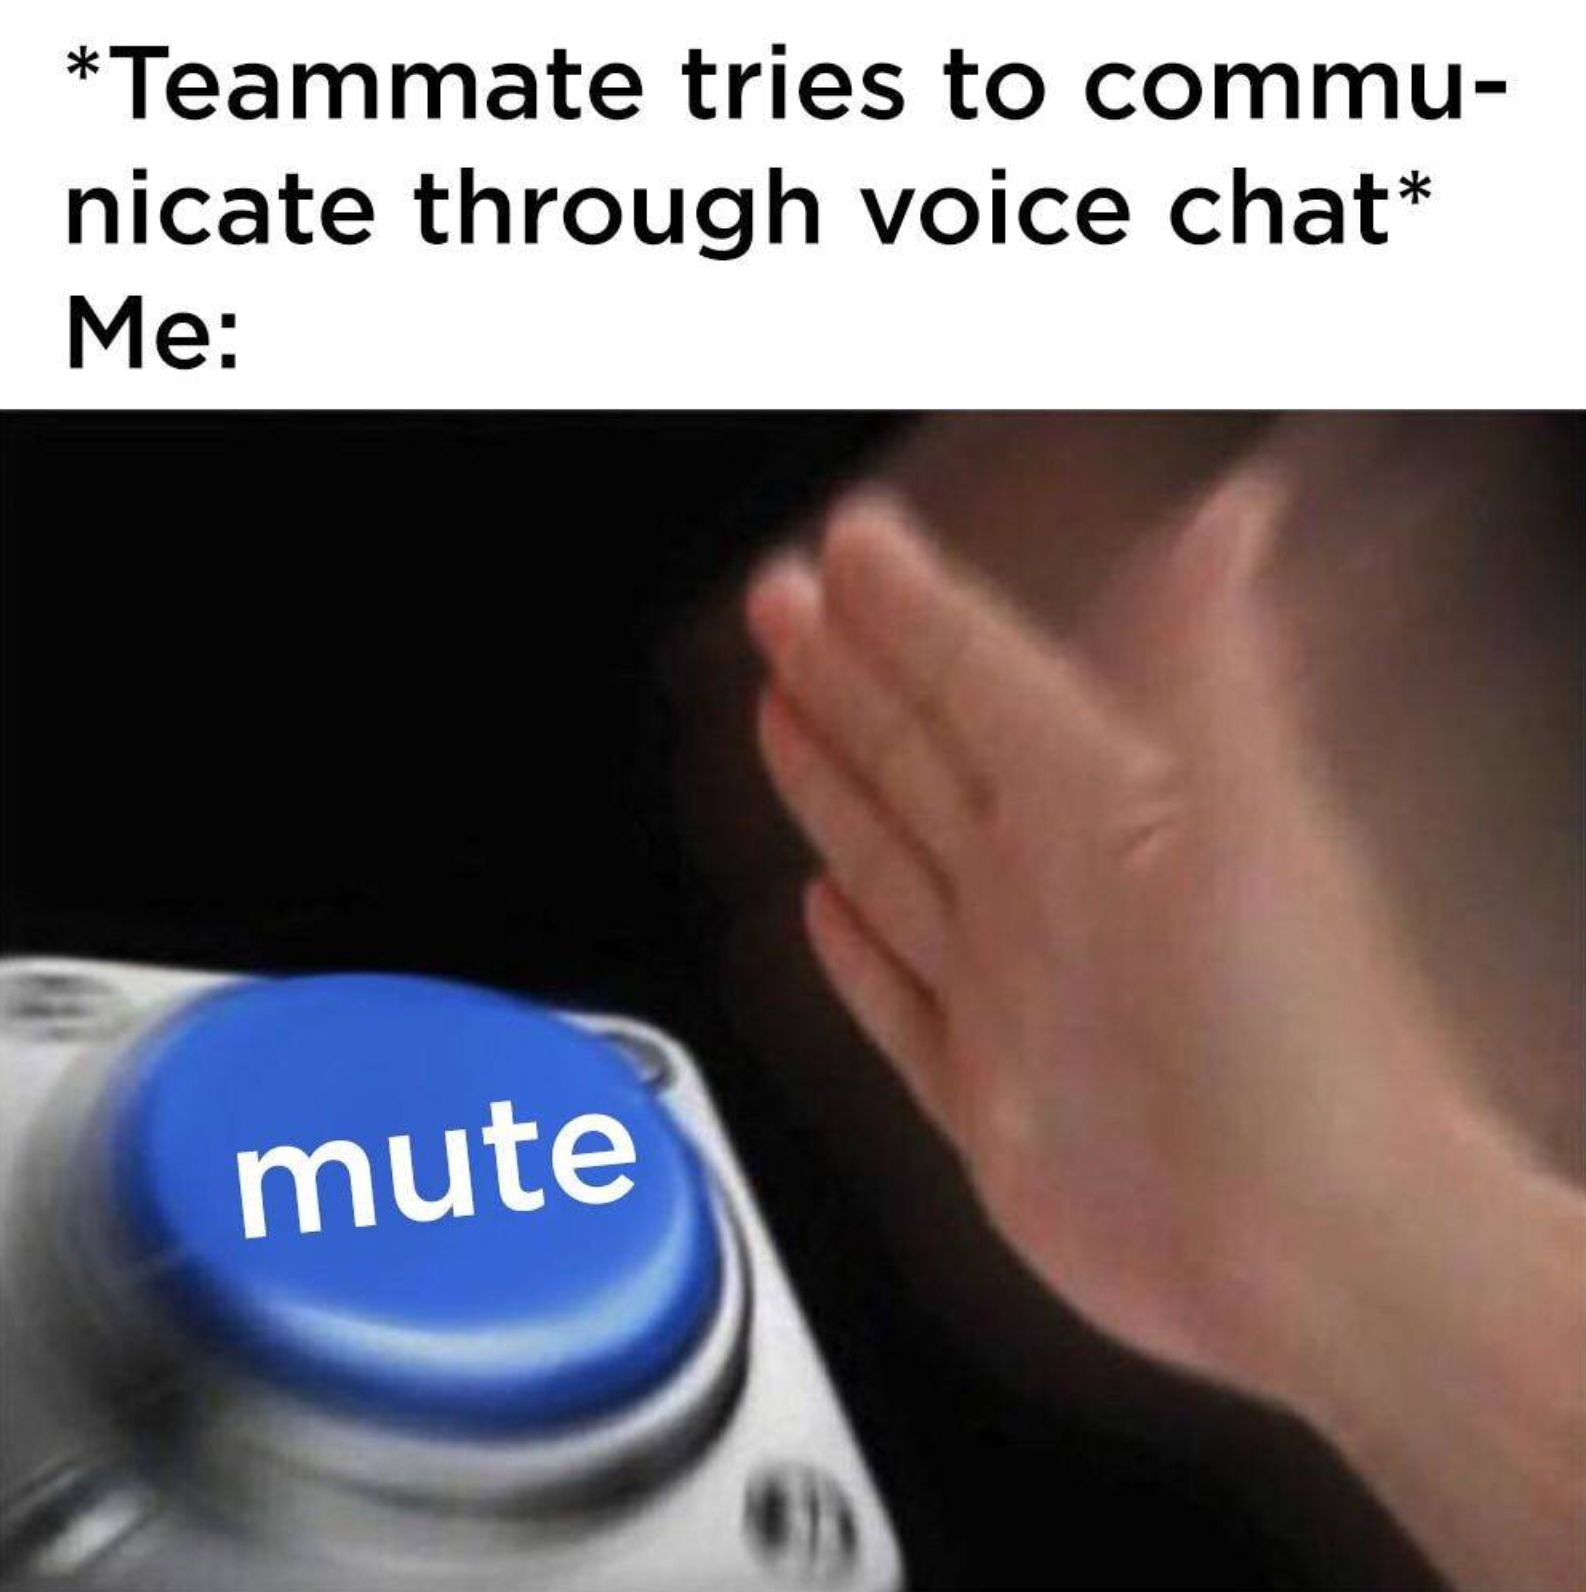 gaming memes - add to wishlist meme - Teammate tries to commu nicate through voice chat Me mute